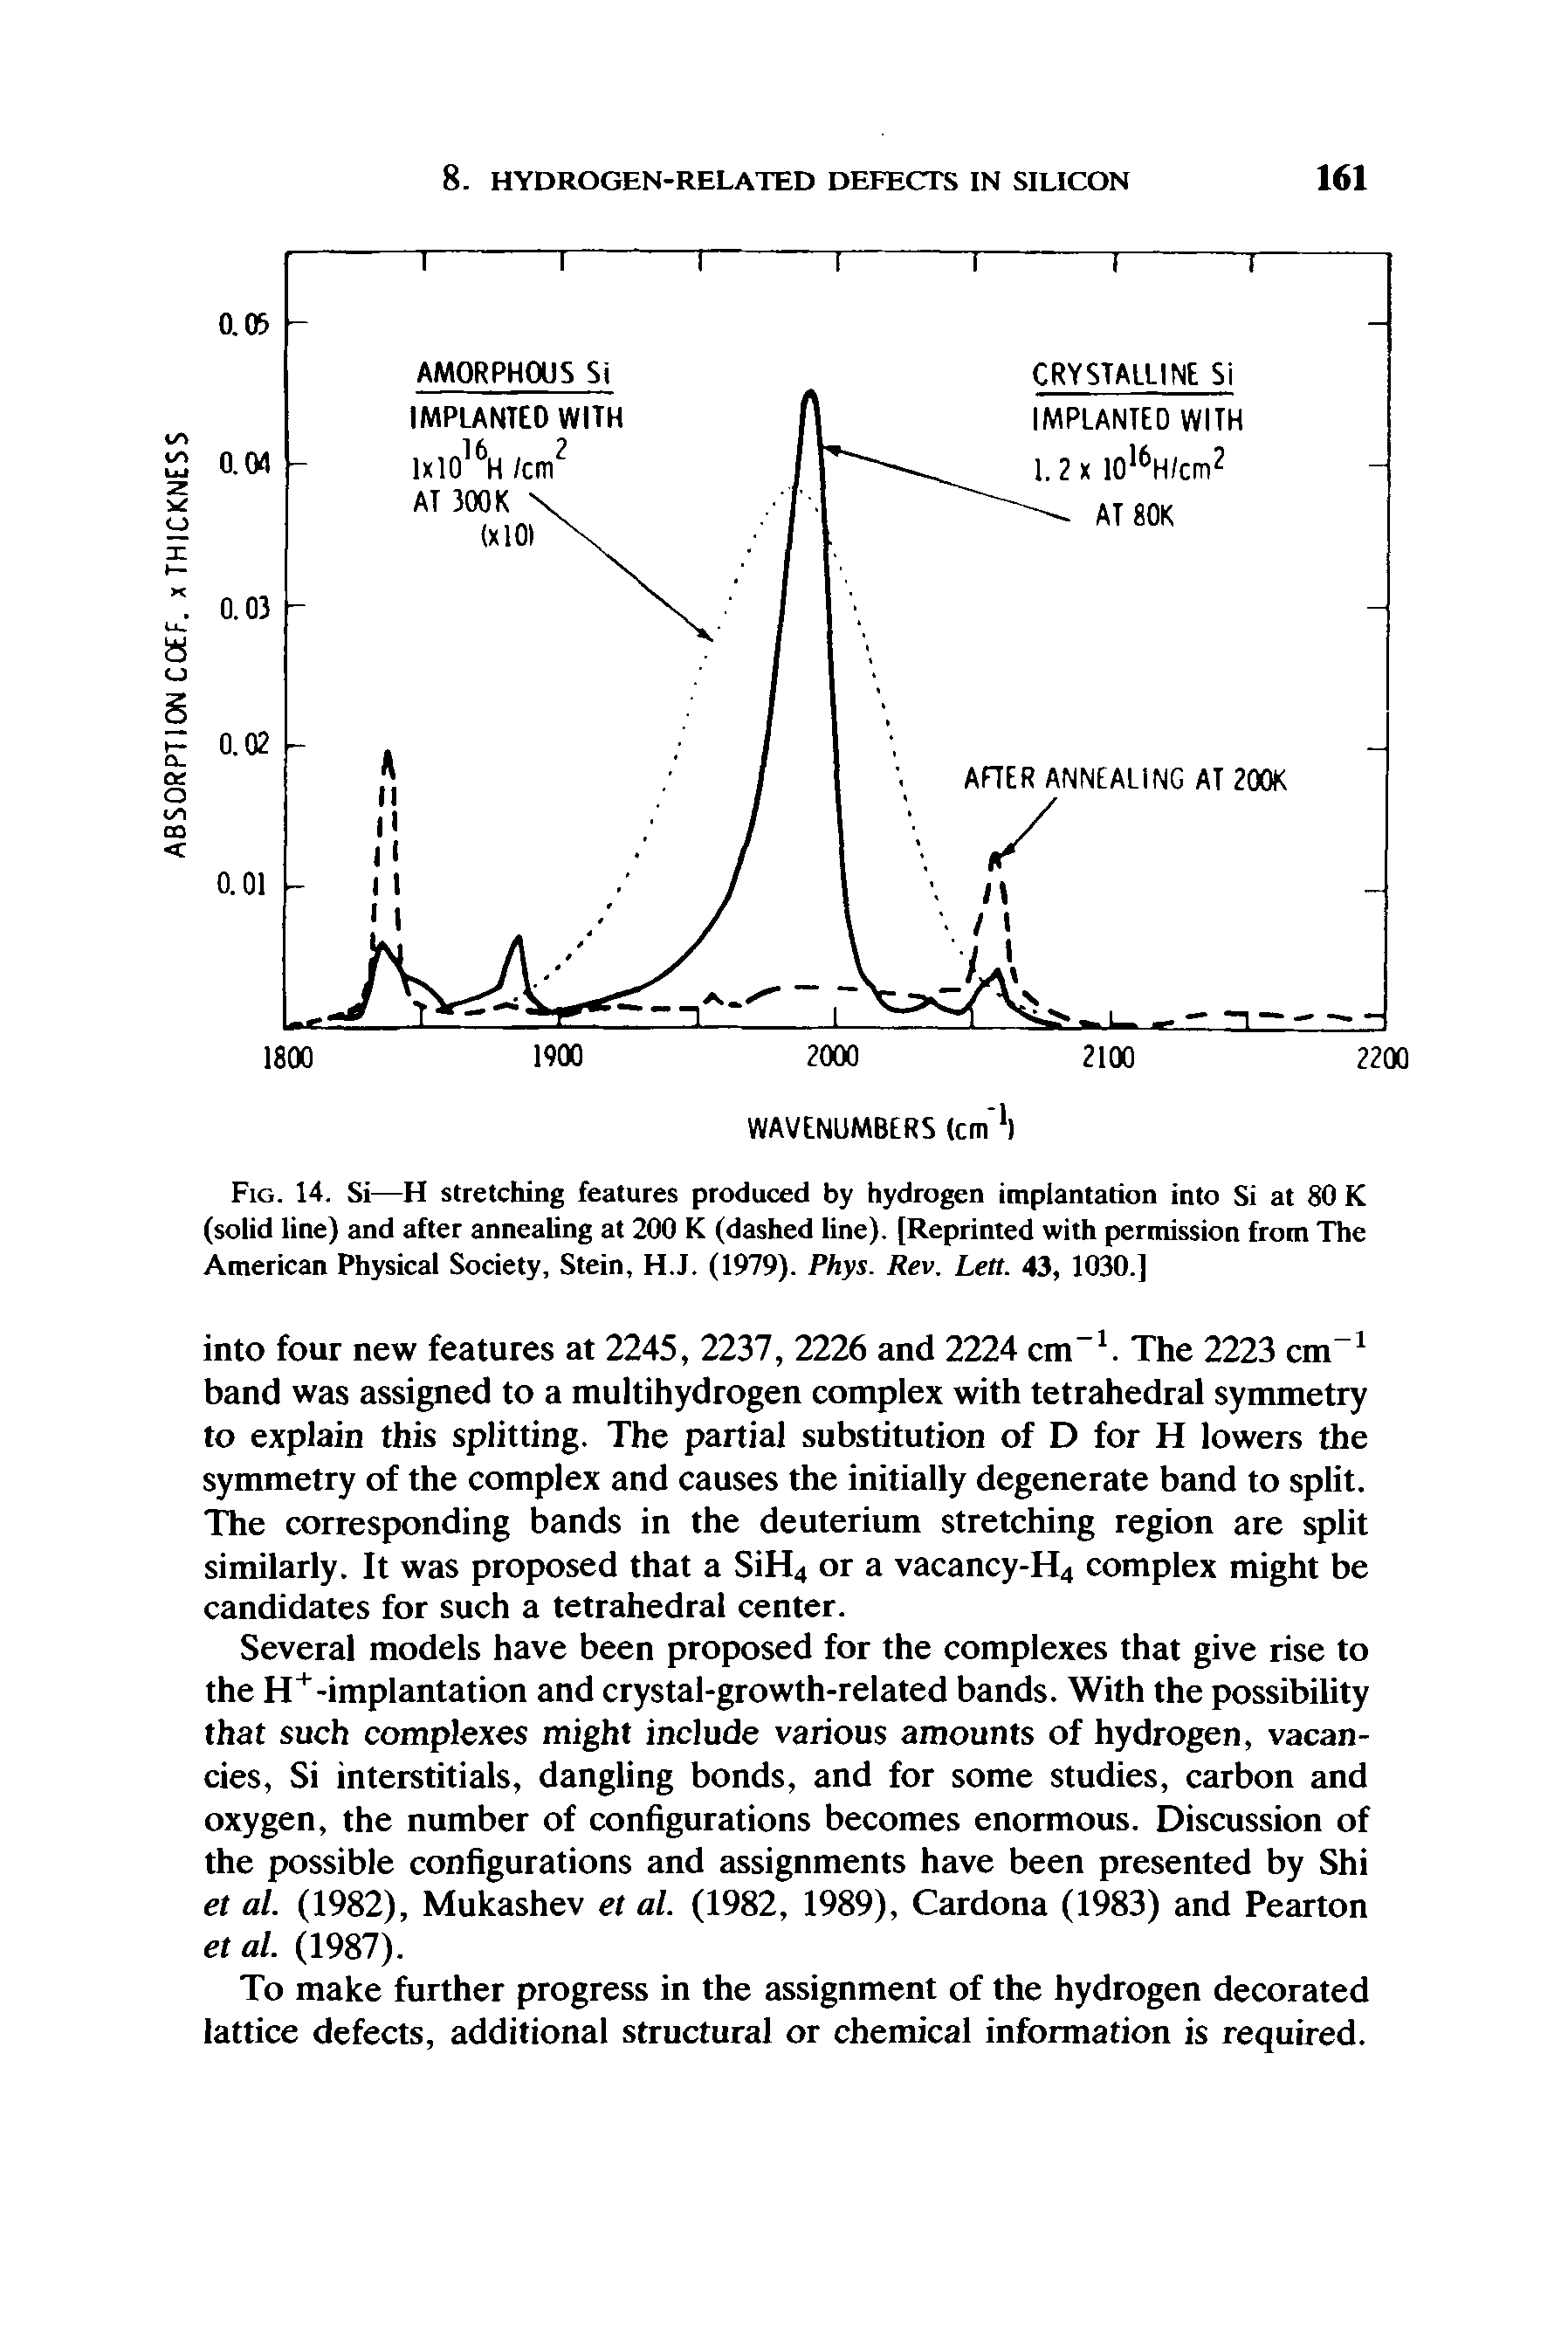 Fig. 14. Si—H stretching features produced by hydrogen implantation into Si at 80 K (solid line) and after annealing at 200 K (dashed line). [Reprinted with permission from The American Physical Society, Stein, H.J. (1979). Phys. Rev. Lett. 43, 1030.]...